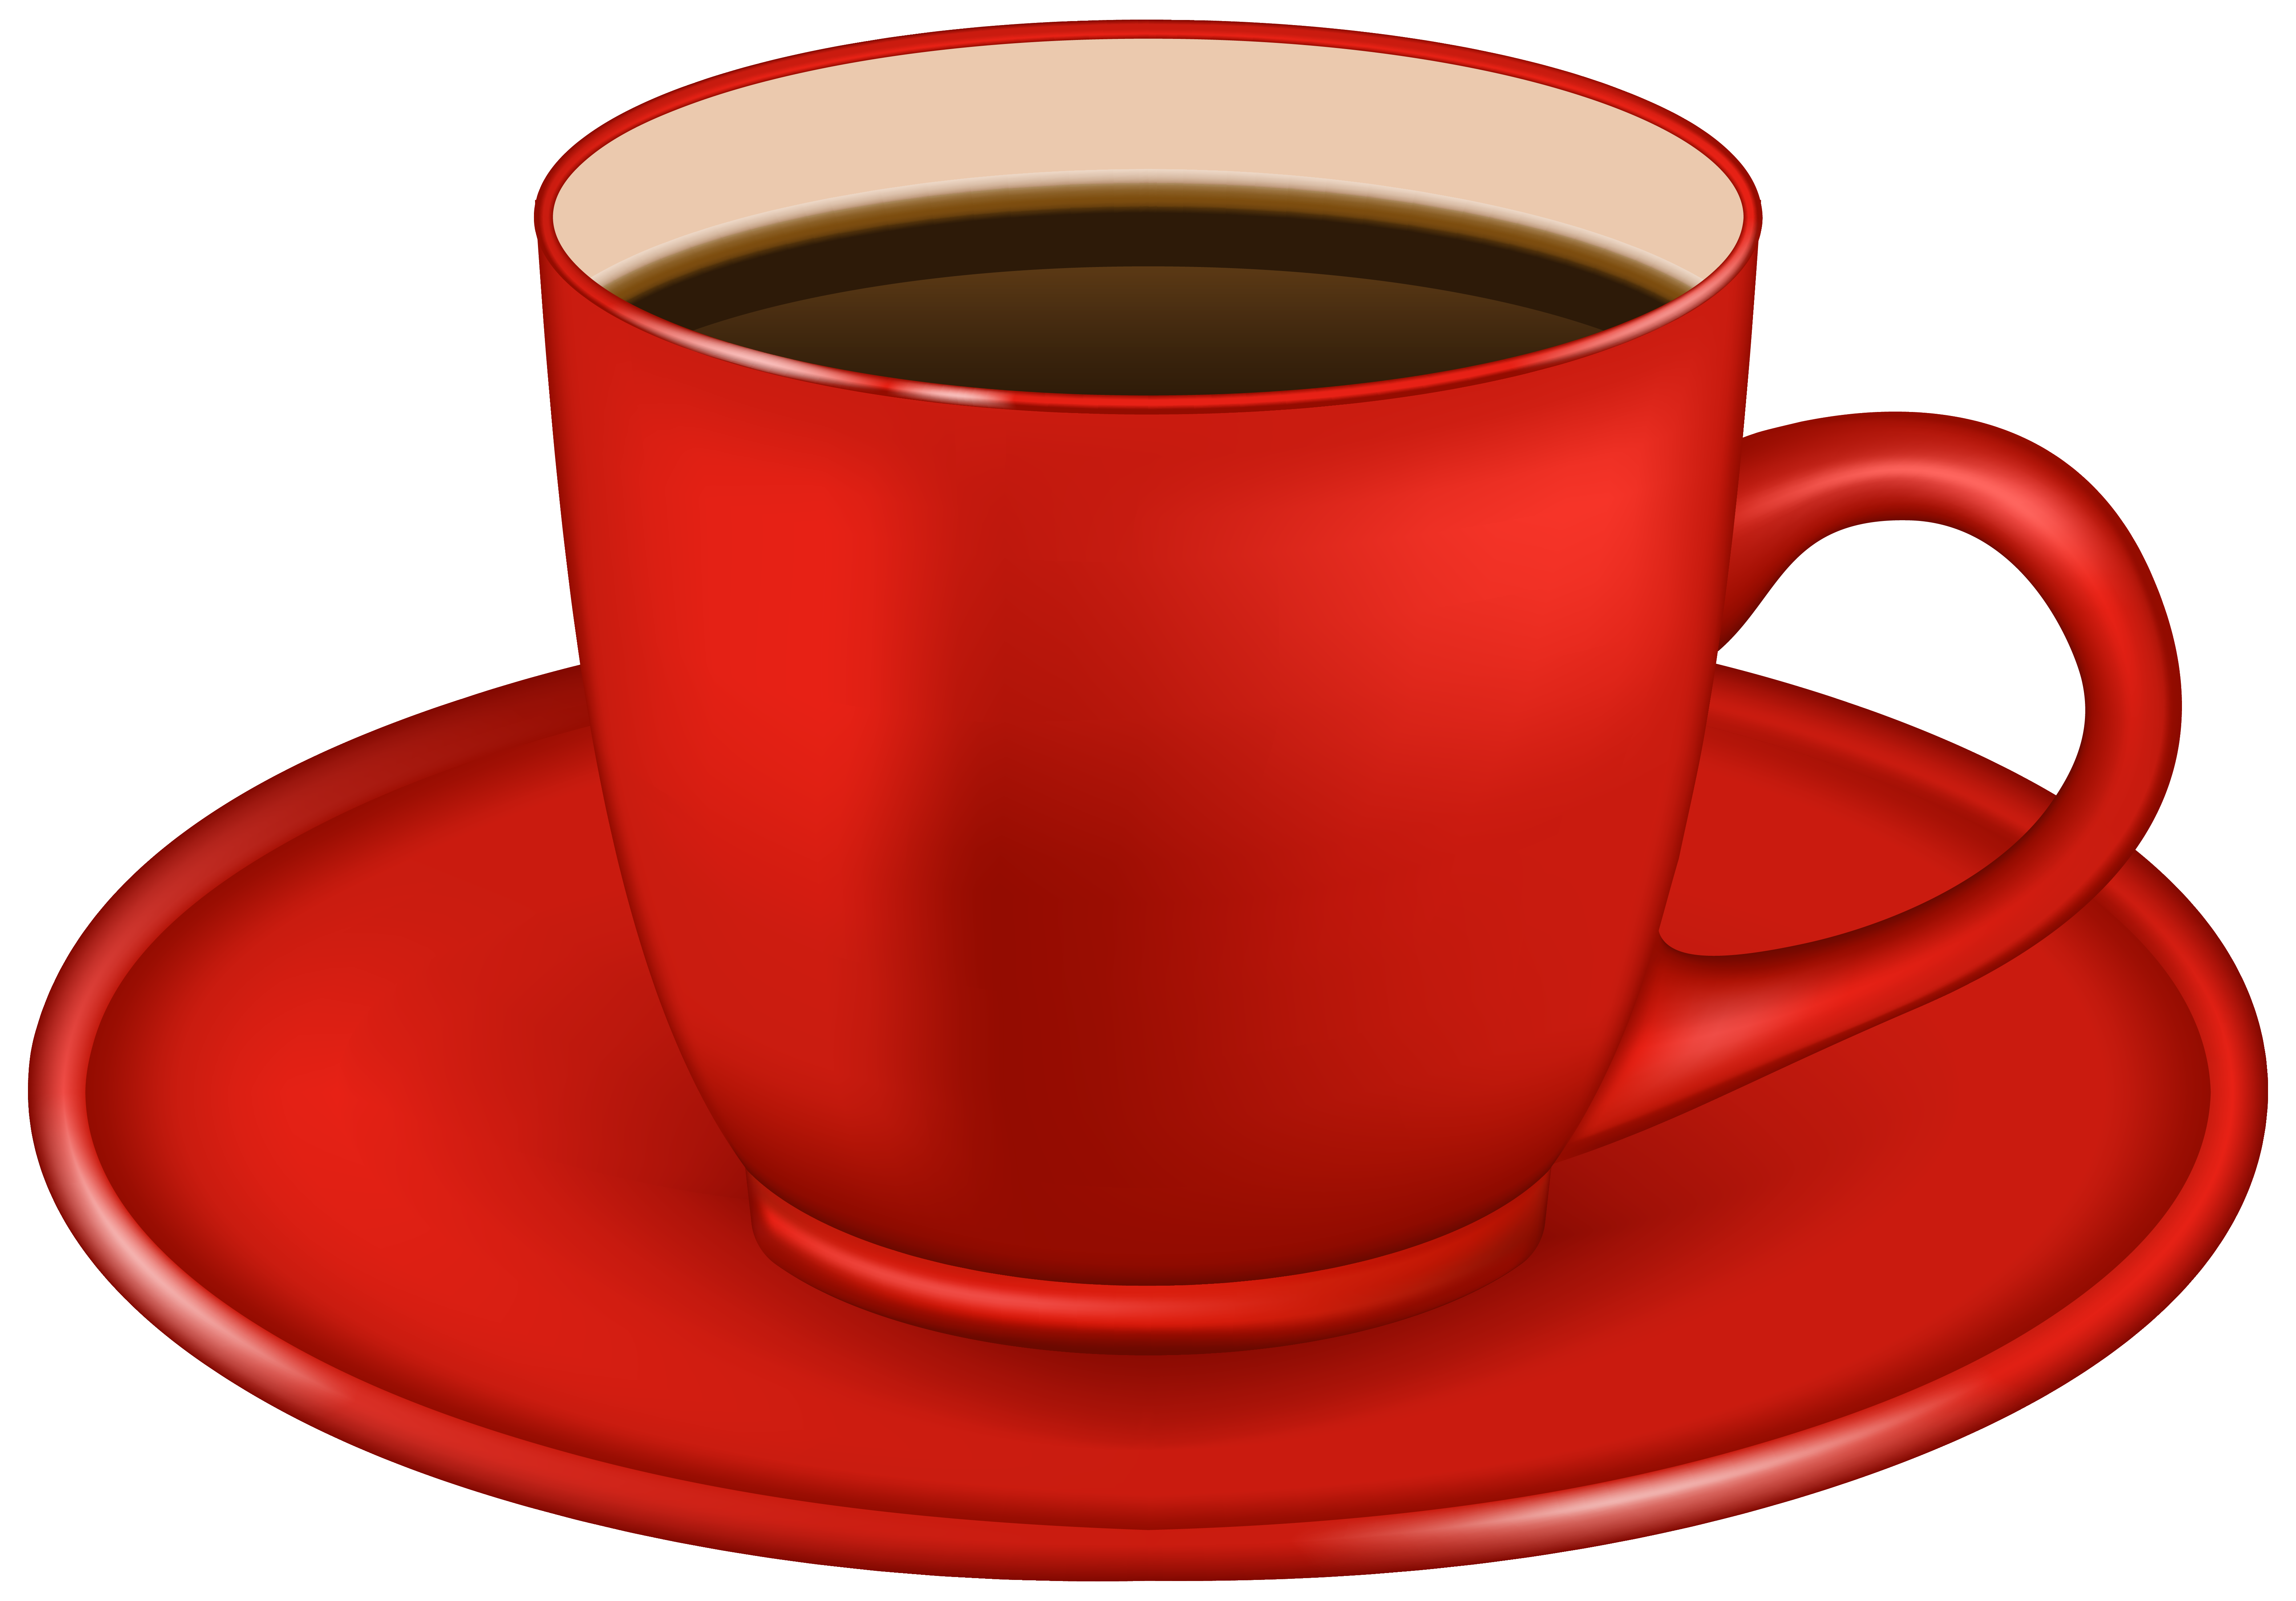 coffee cup clip art png - photo #49